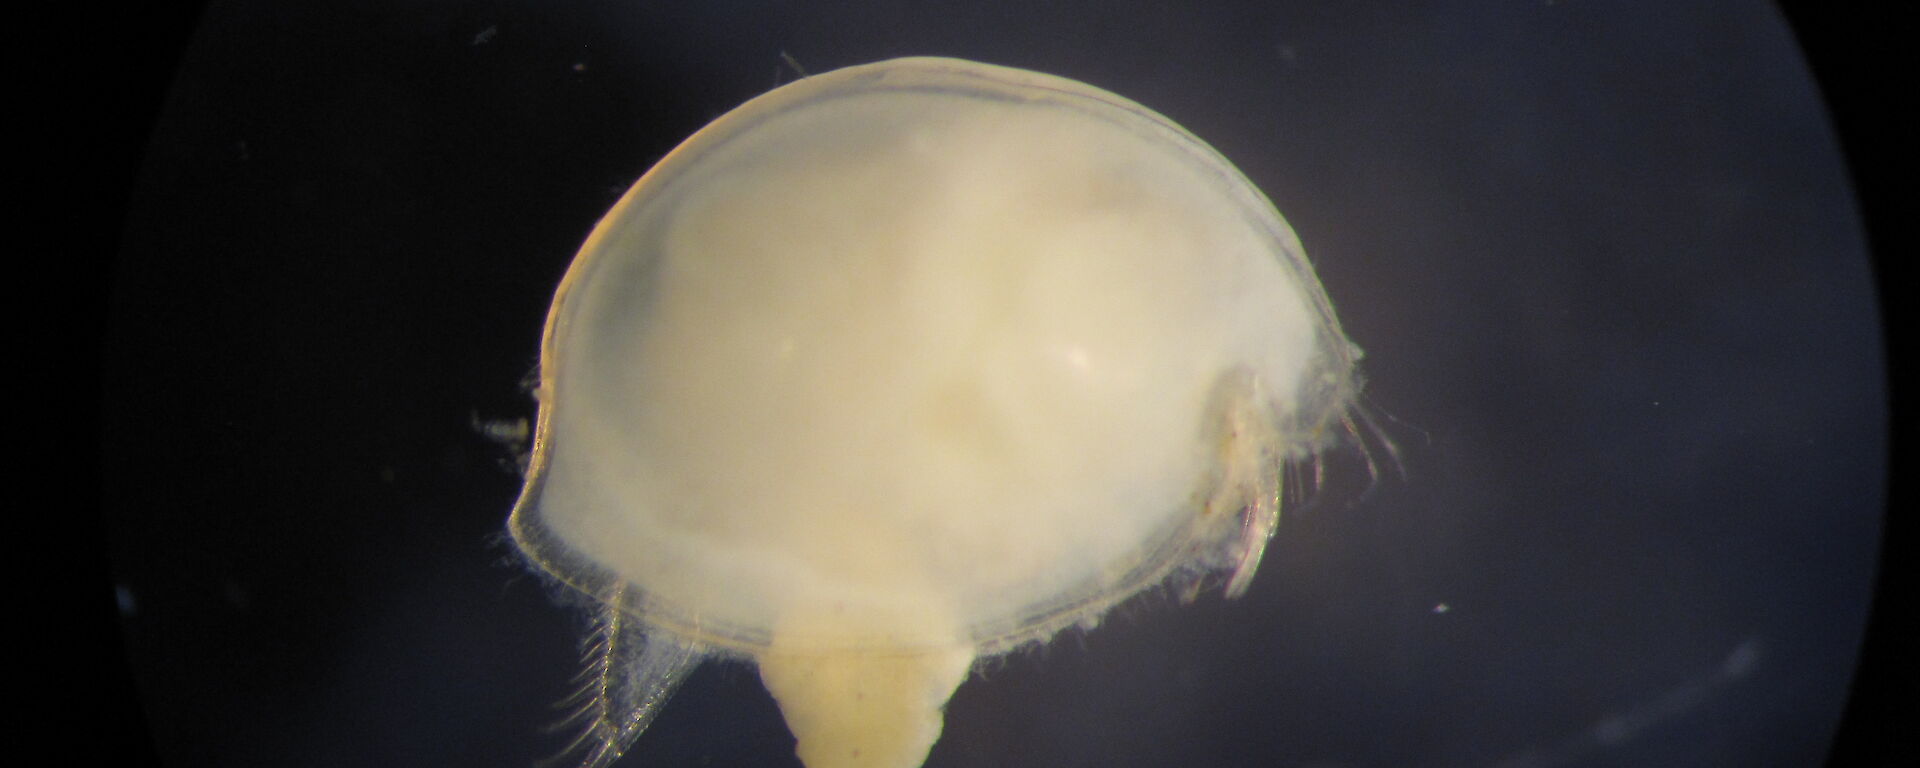 An ostracod, Philomedes charcoti — a small, sediment dwelling crustacean